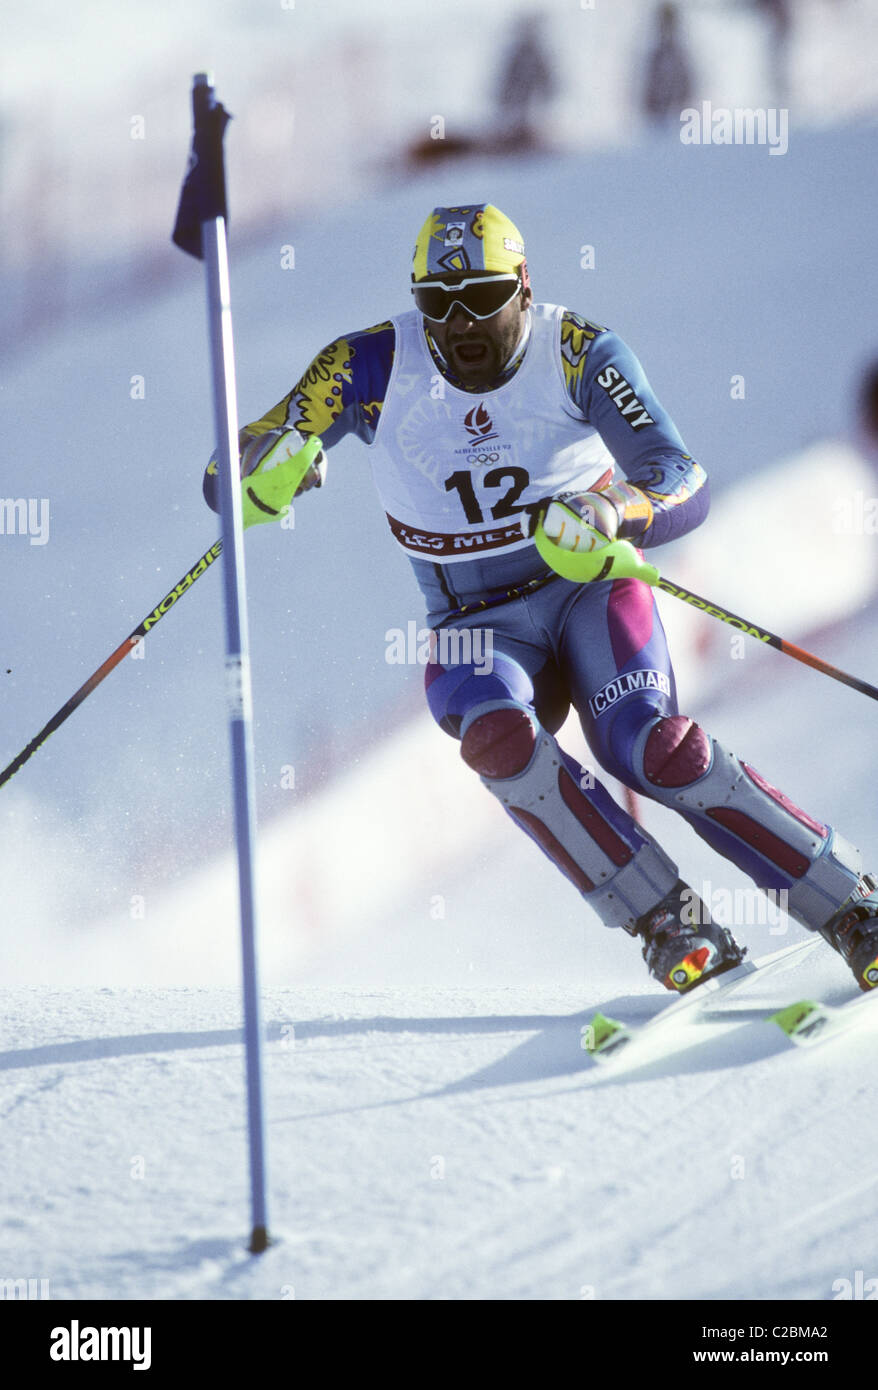 Alberto Tomba (ITA) silver medalist competing in the Slalom at the 1992 Olympic Winter Games, Albertville, France Stock Photo